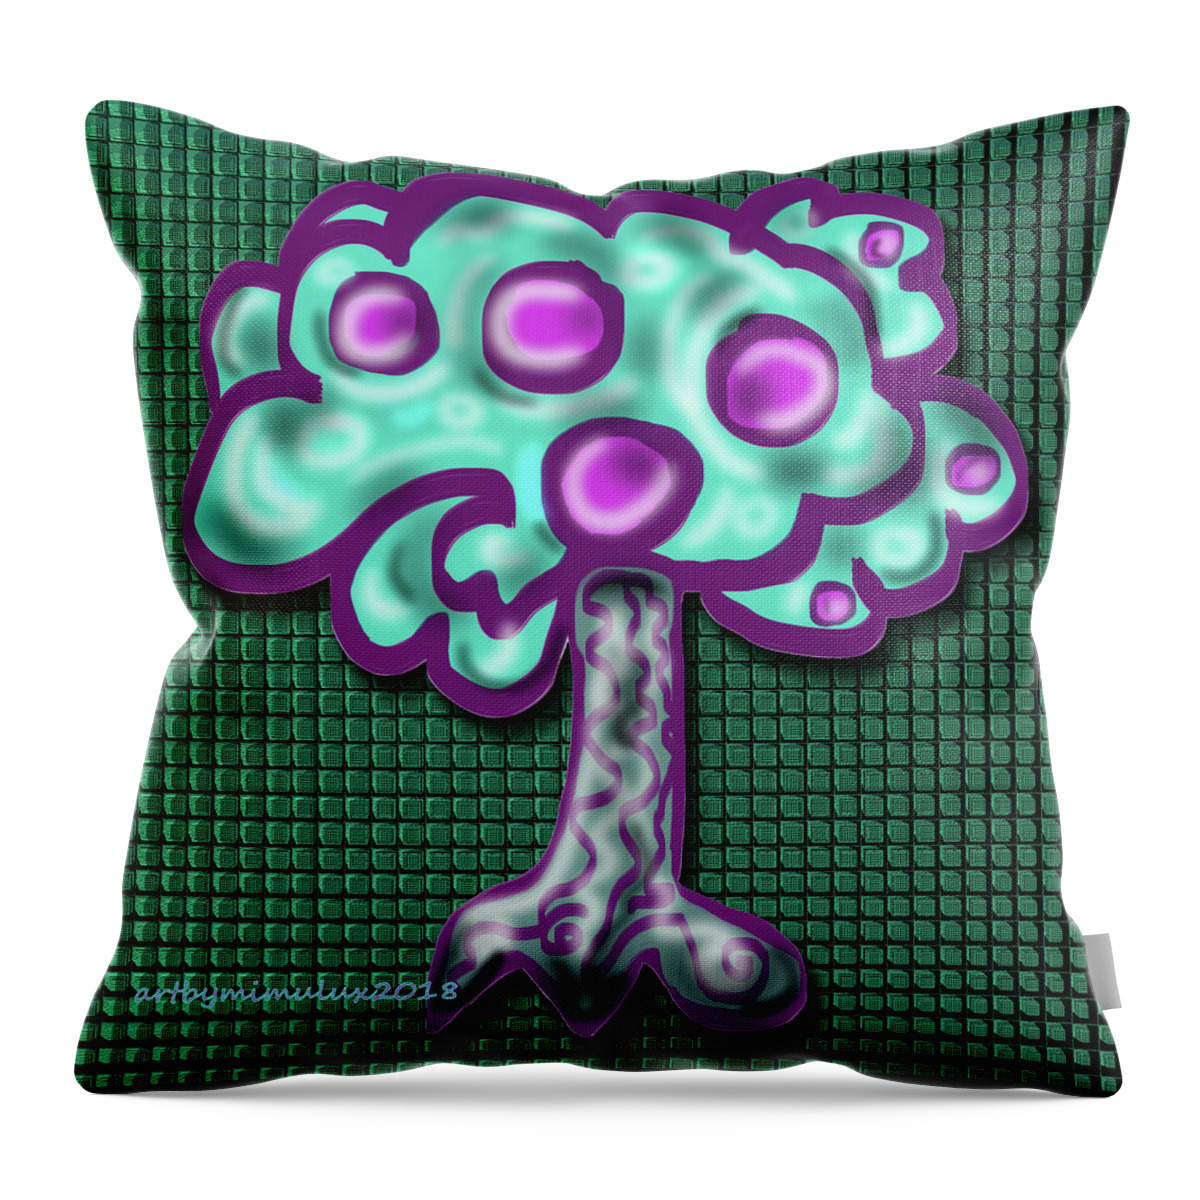 Tree Throw Pillow featuring the digital art Neon Tree by Mimulux Patricia No